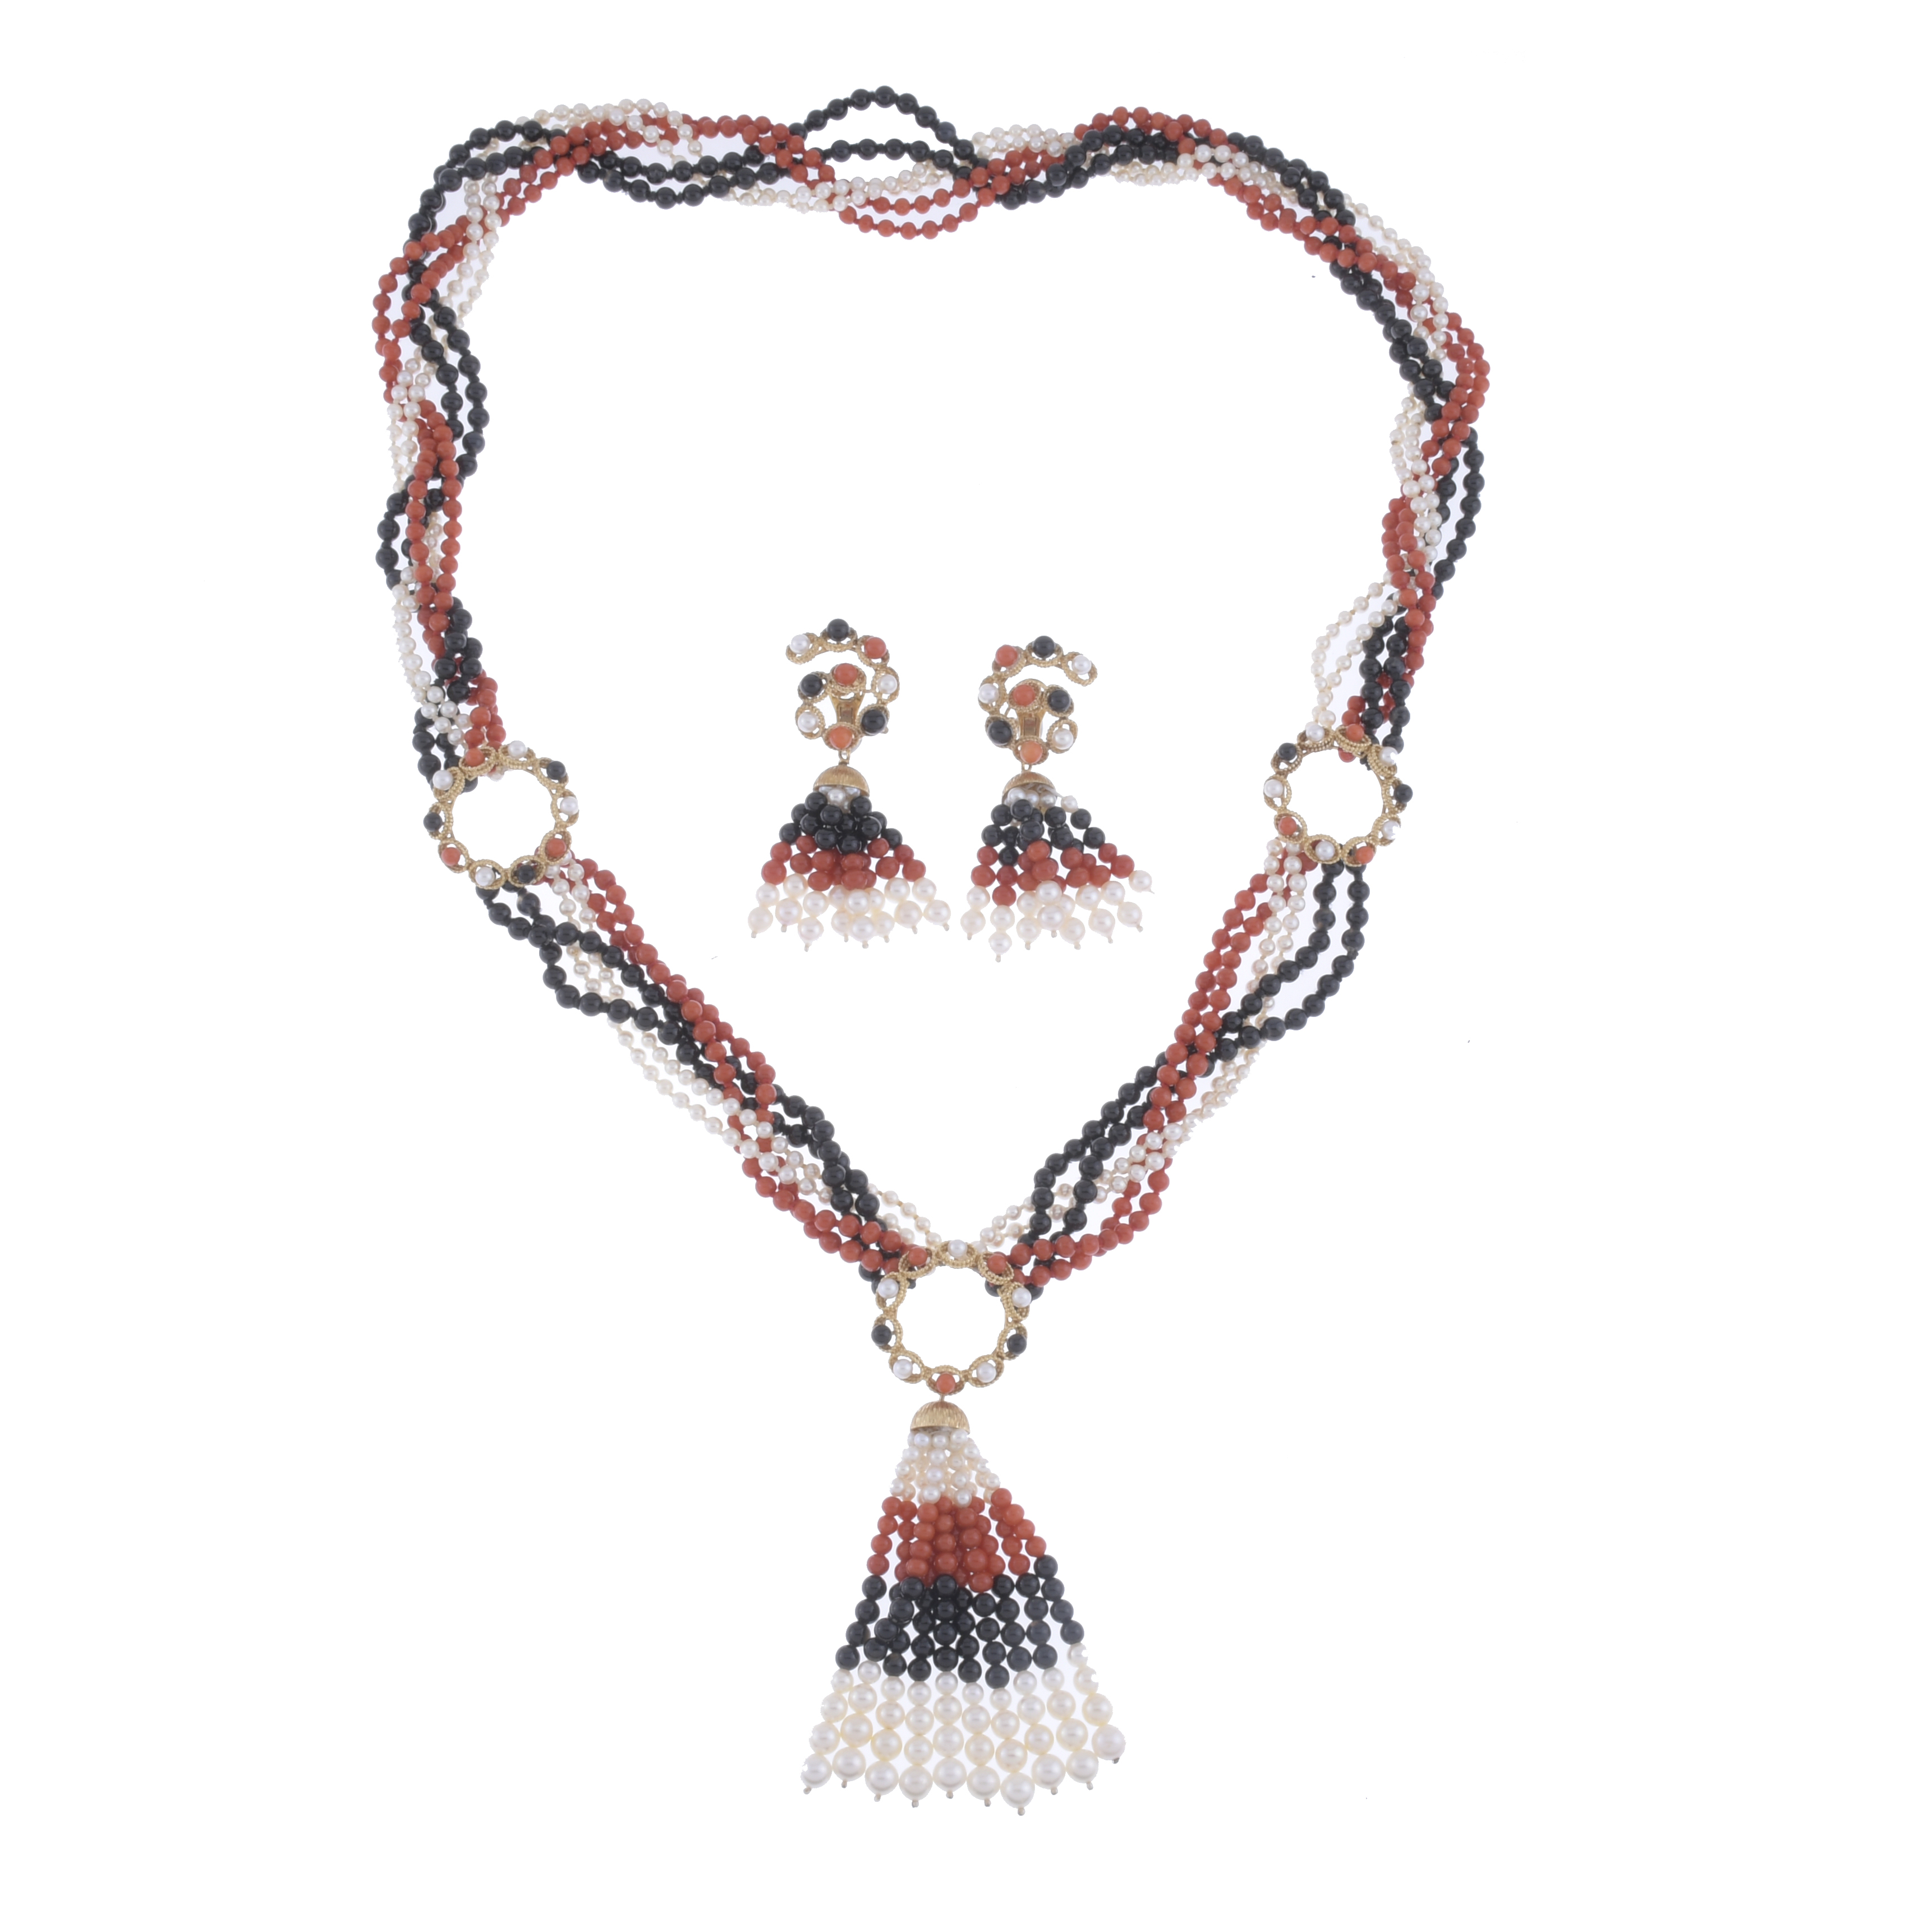 LONG NECKLACE AND EARRINGS IN CORAL, ONYX AND PEARLS.